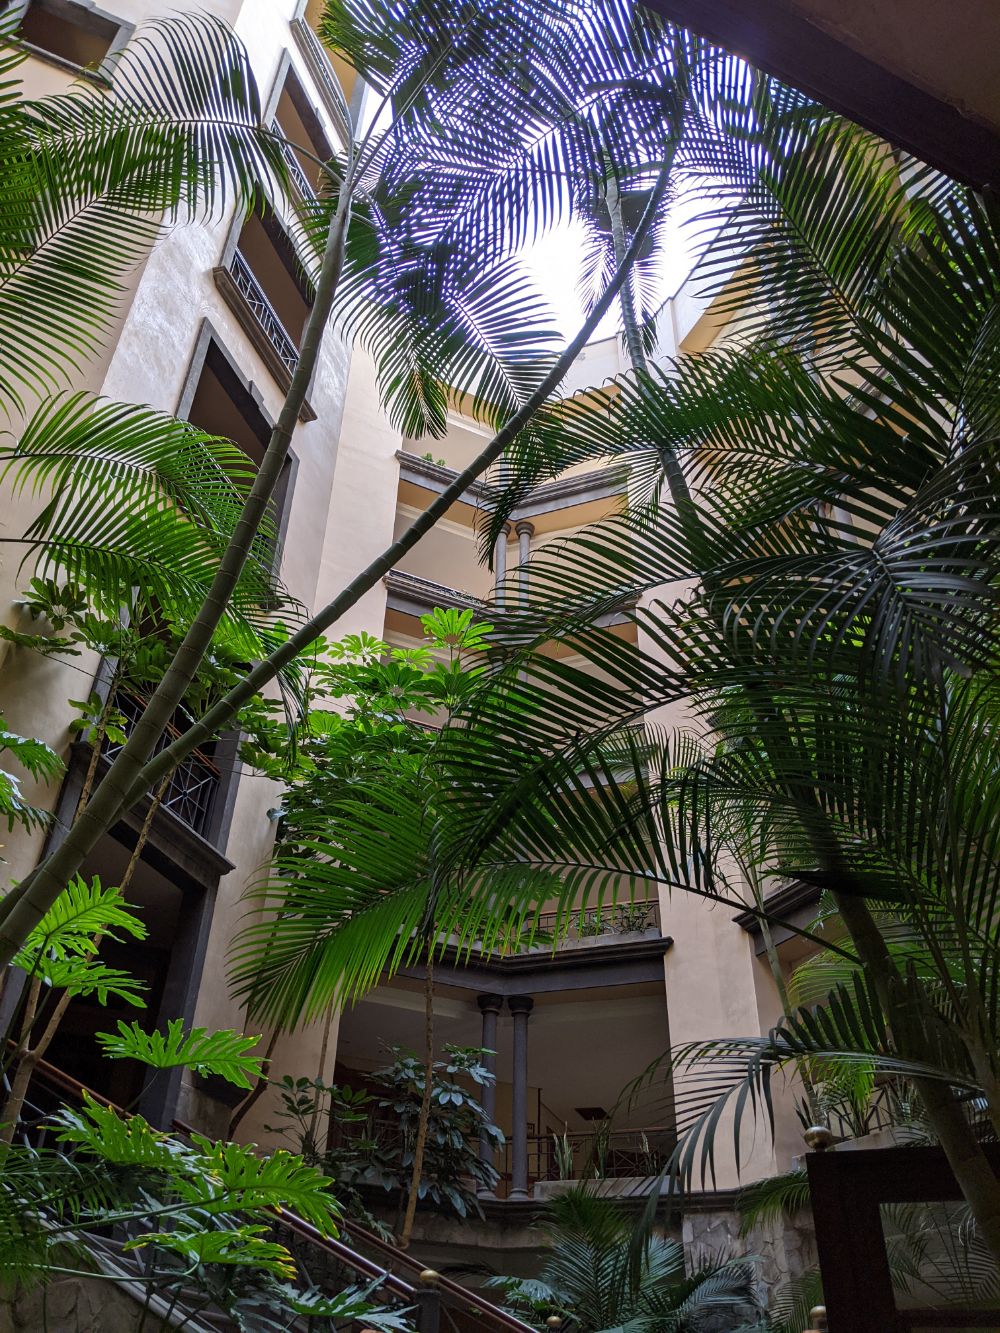 Interior of a hotel, looking up, full of trees and plants